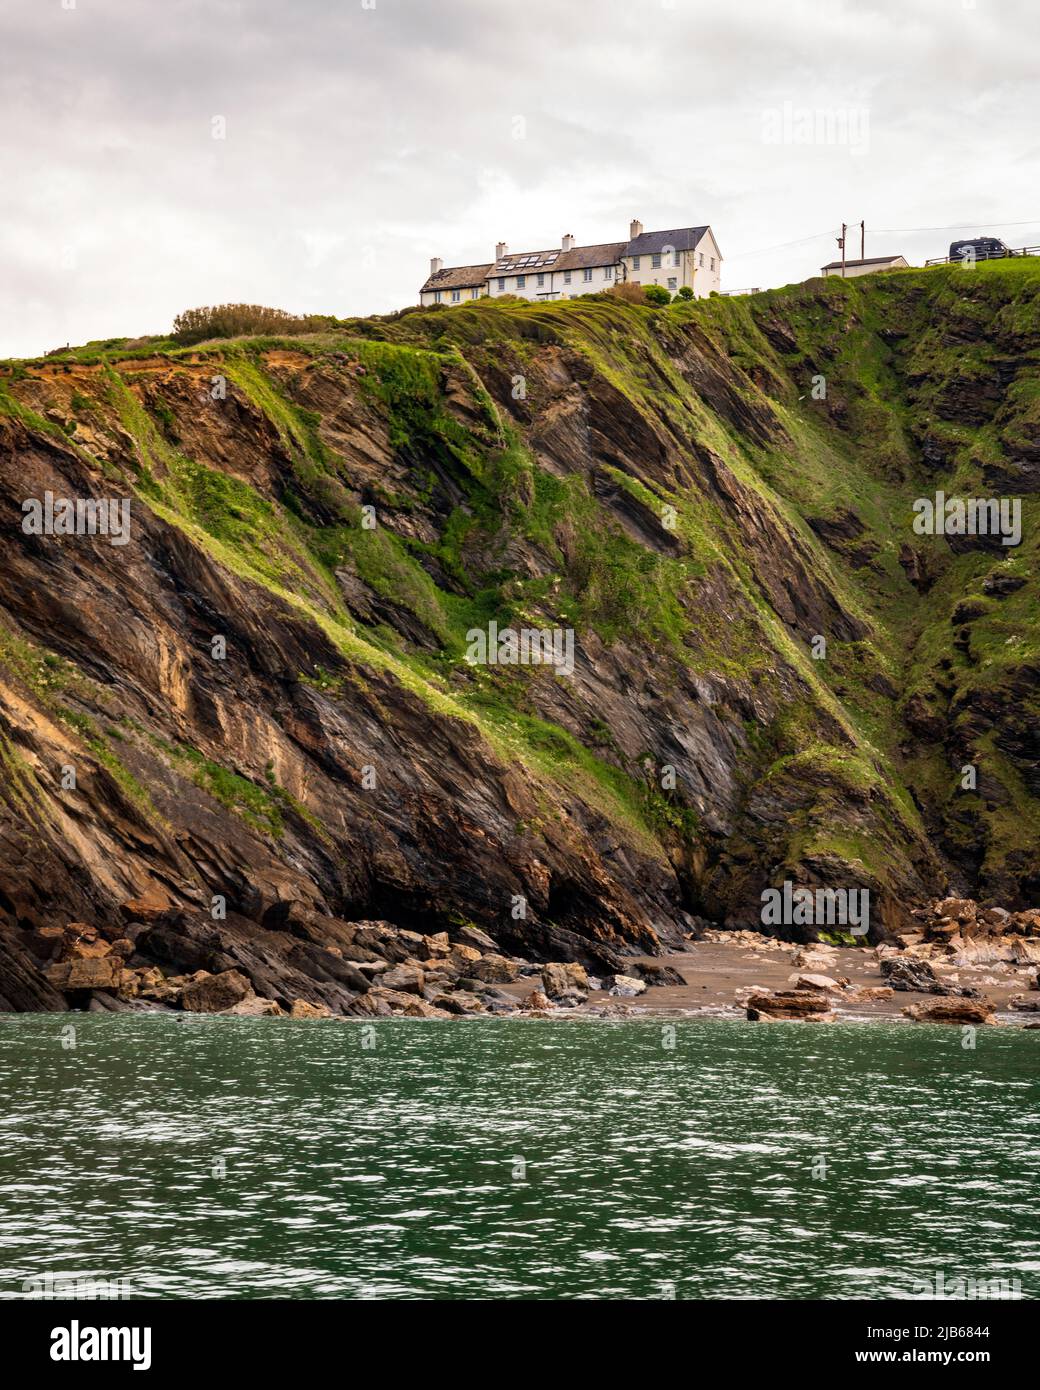 Former coast guard cottages above cliffs overlooking Hele Bay near Ilfracombe, Devon, UK. Stock Photo